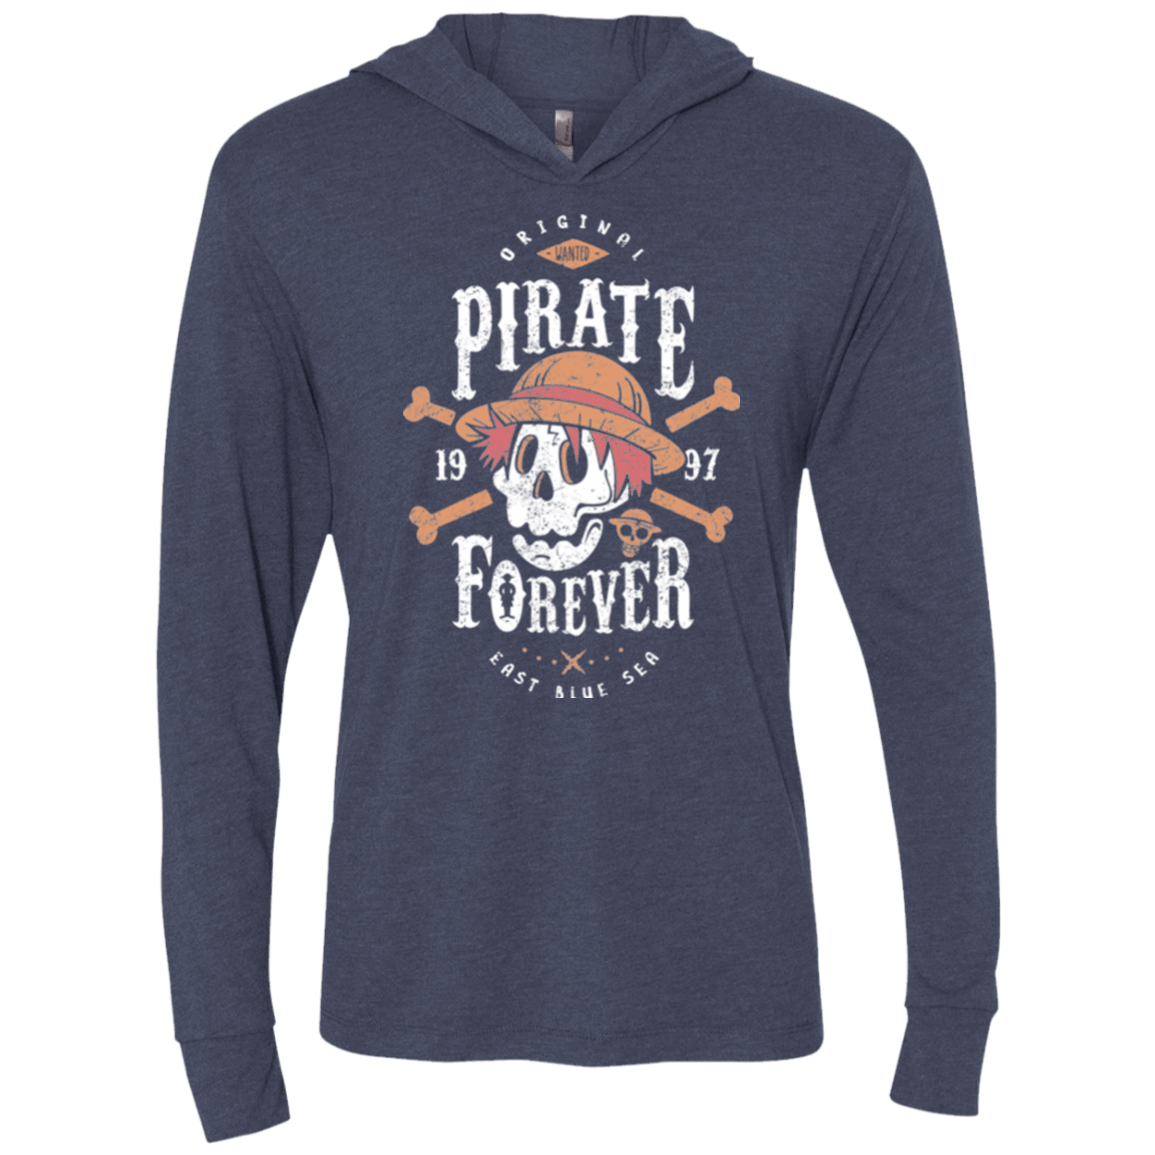 T-Shirts Vintage Navy / X-Small Wanted Pirate Forever Triblend Long Sleeve Hoodie Tee